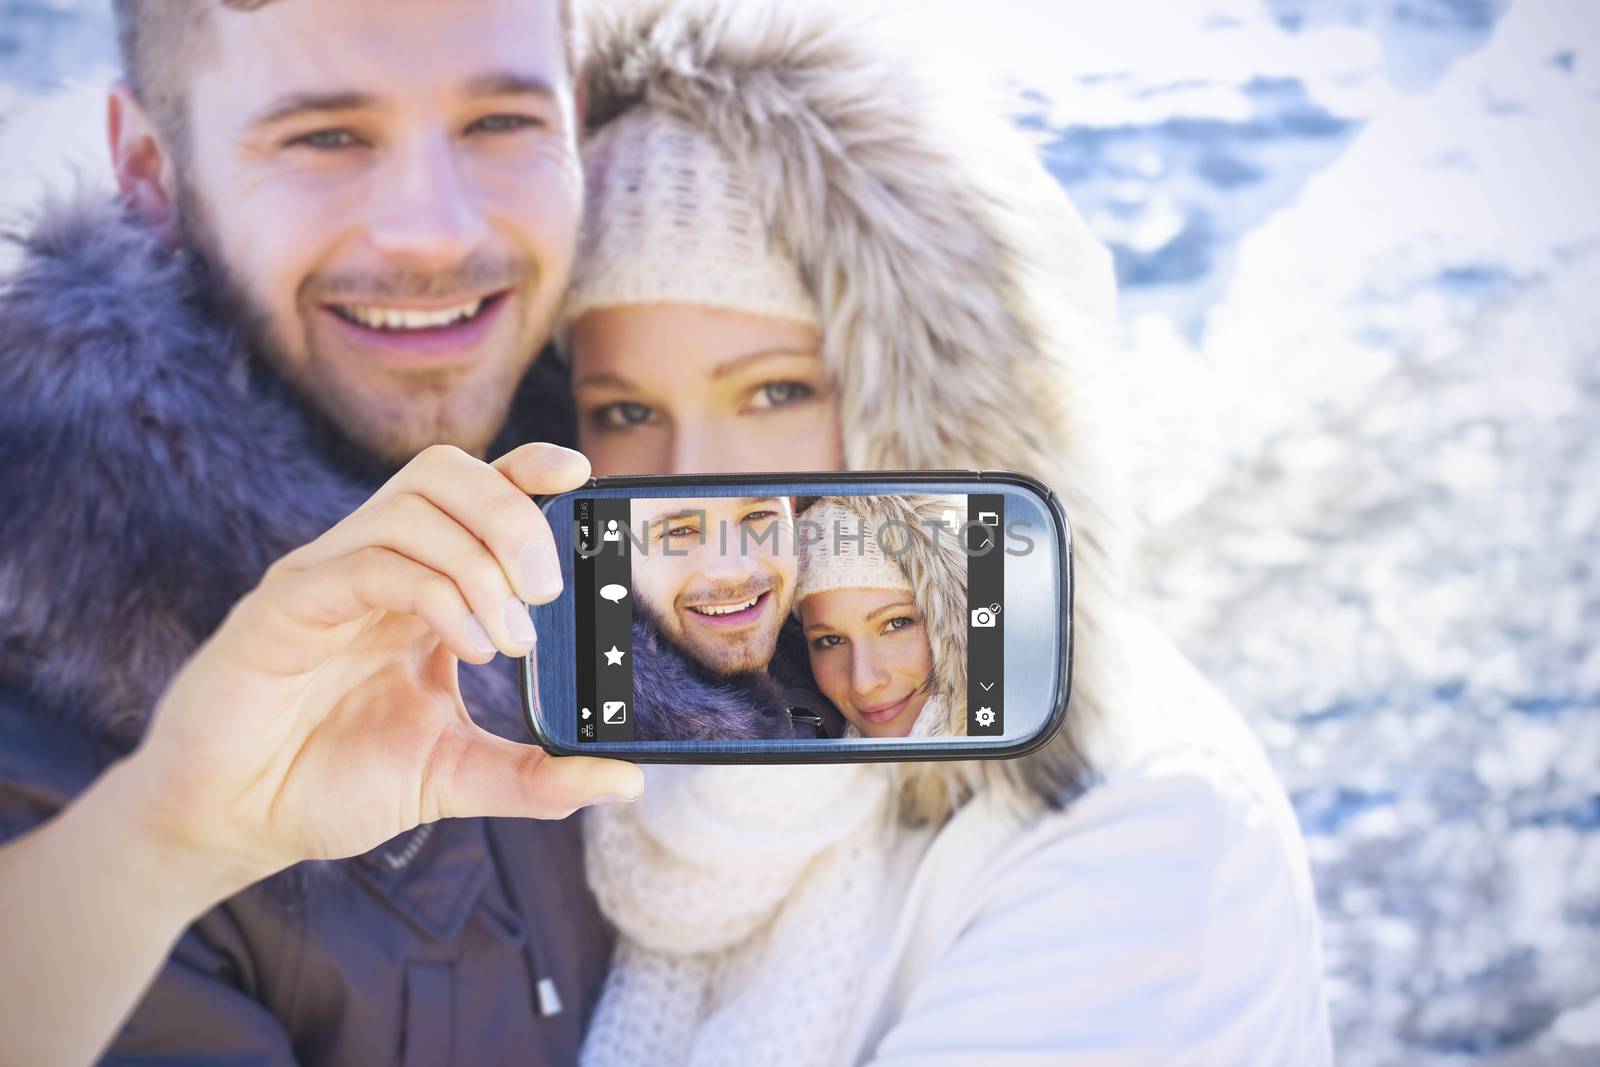 Hand holding smartphone showing against couple in jackets embracing against snowed mountain